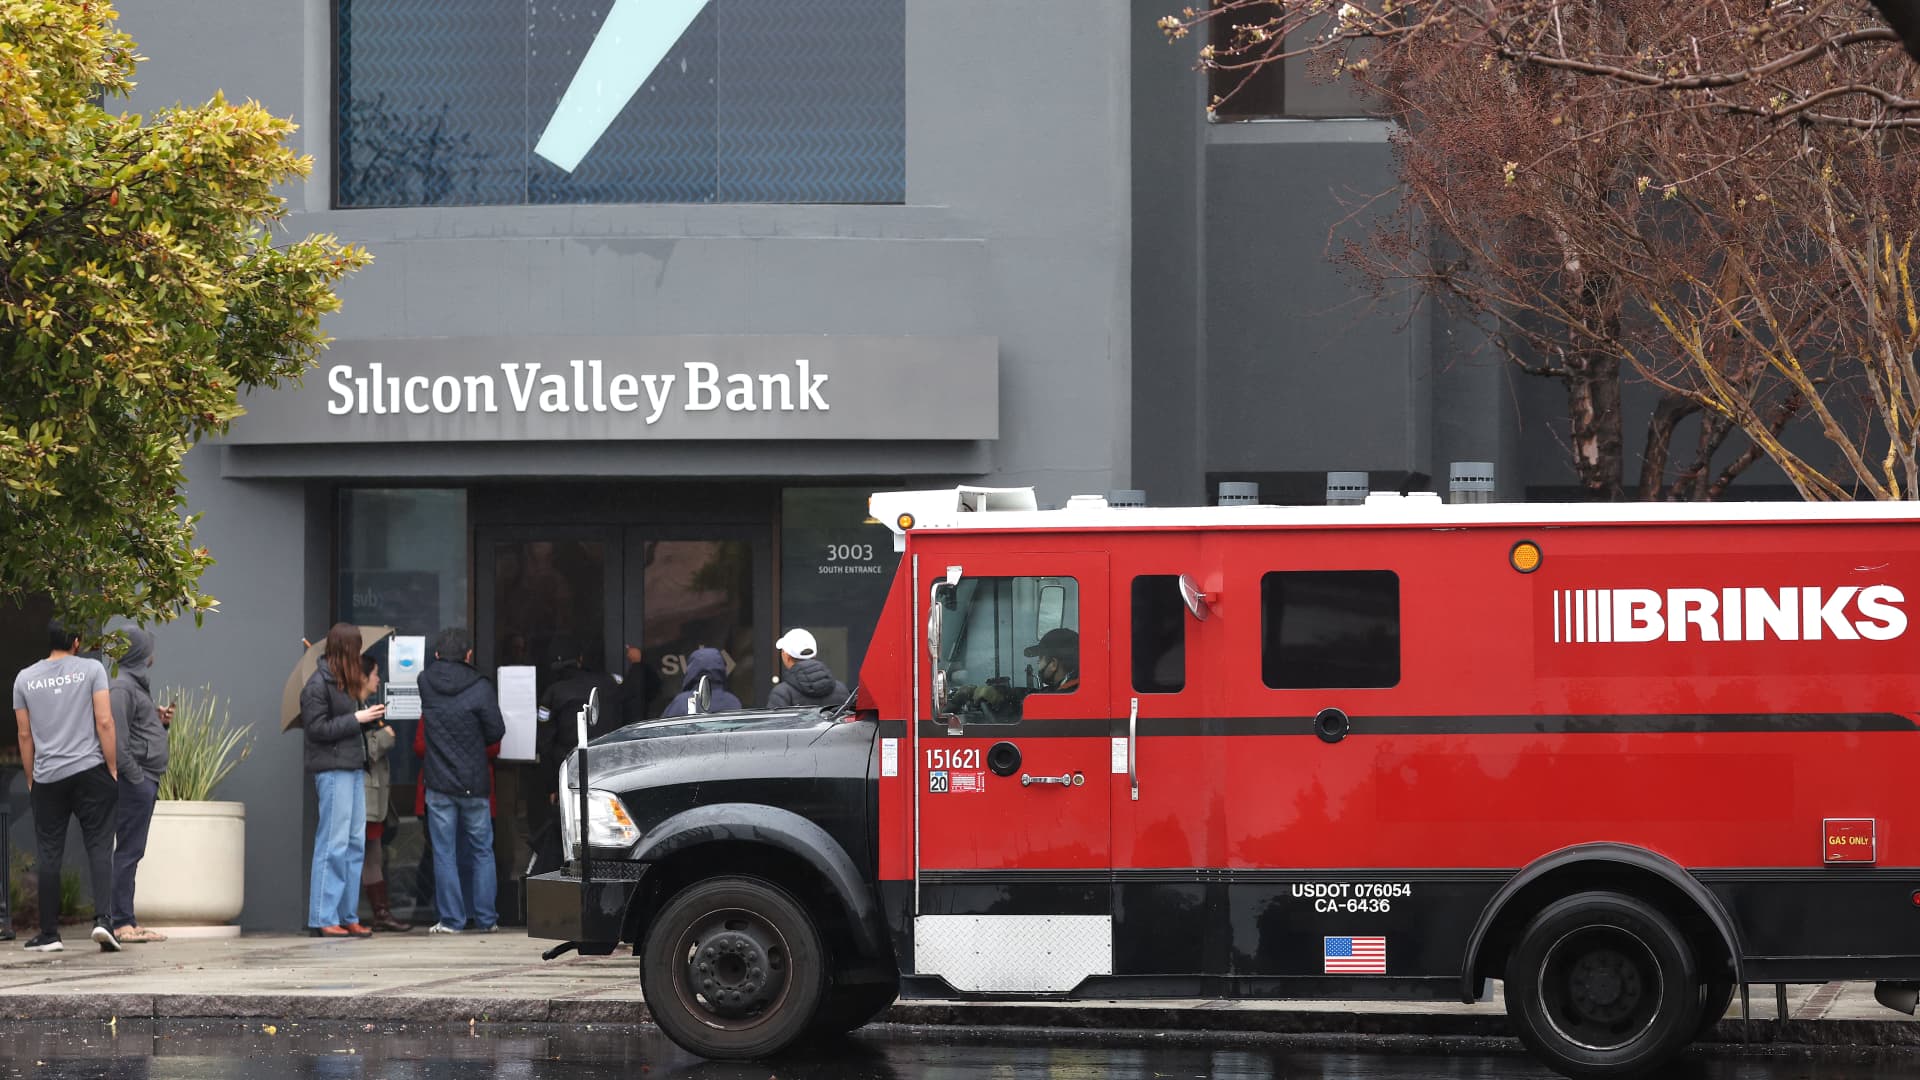 Founders swarmed SVB’s branches looking for answers after bank failure